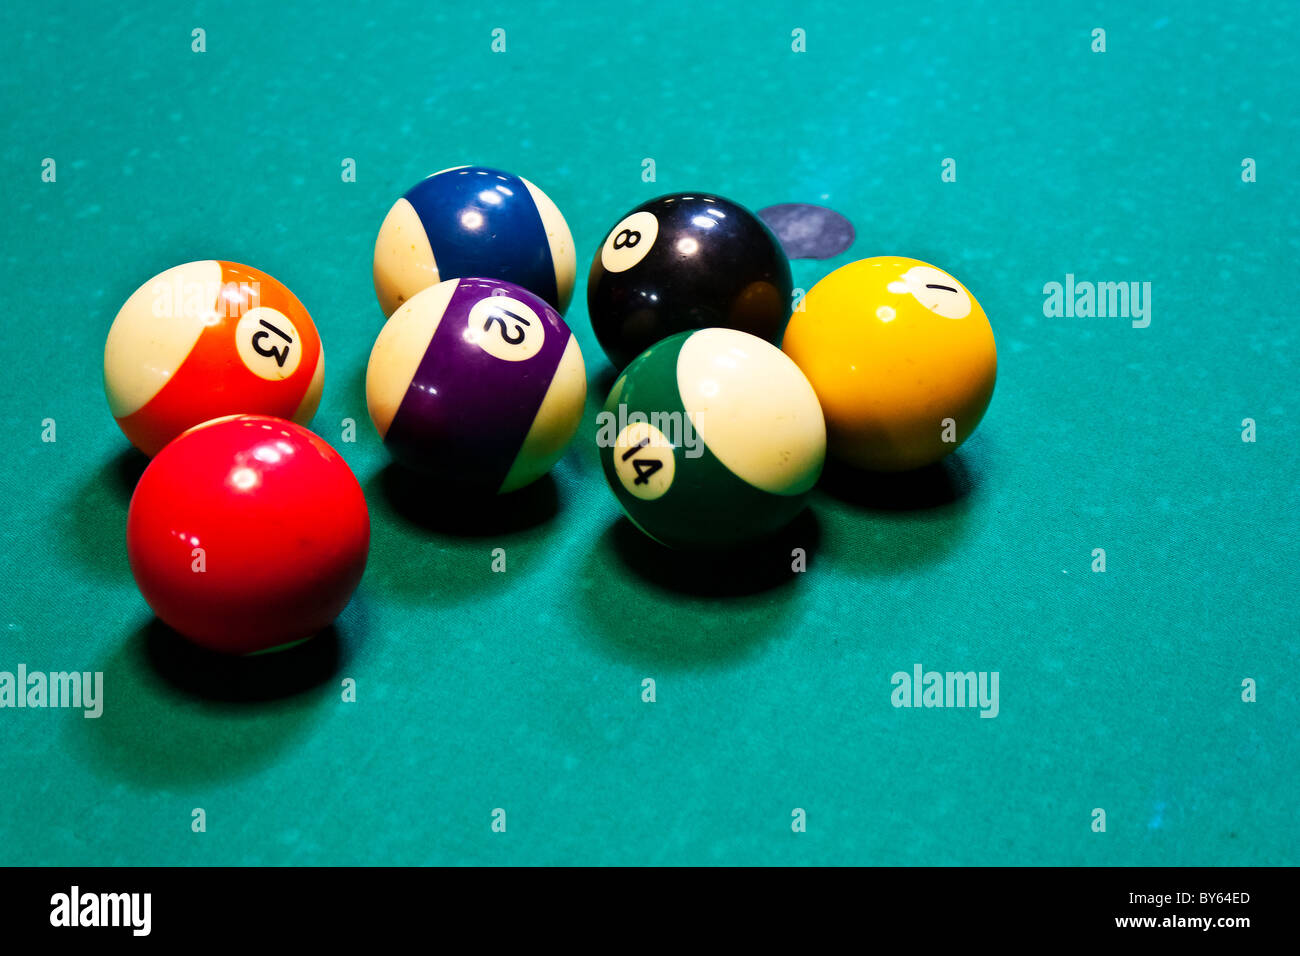 cluster of colored balls on billiard table Stock Photo